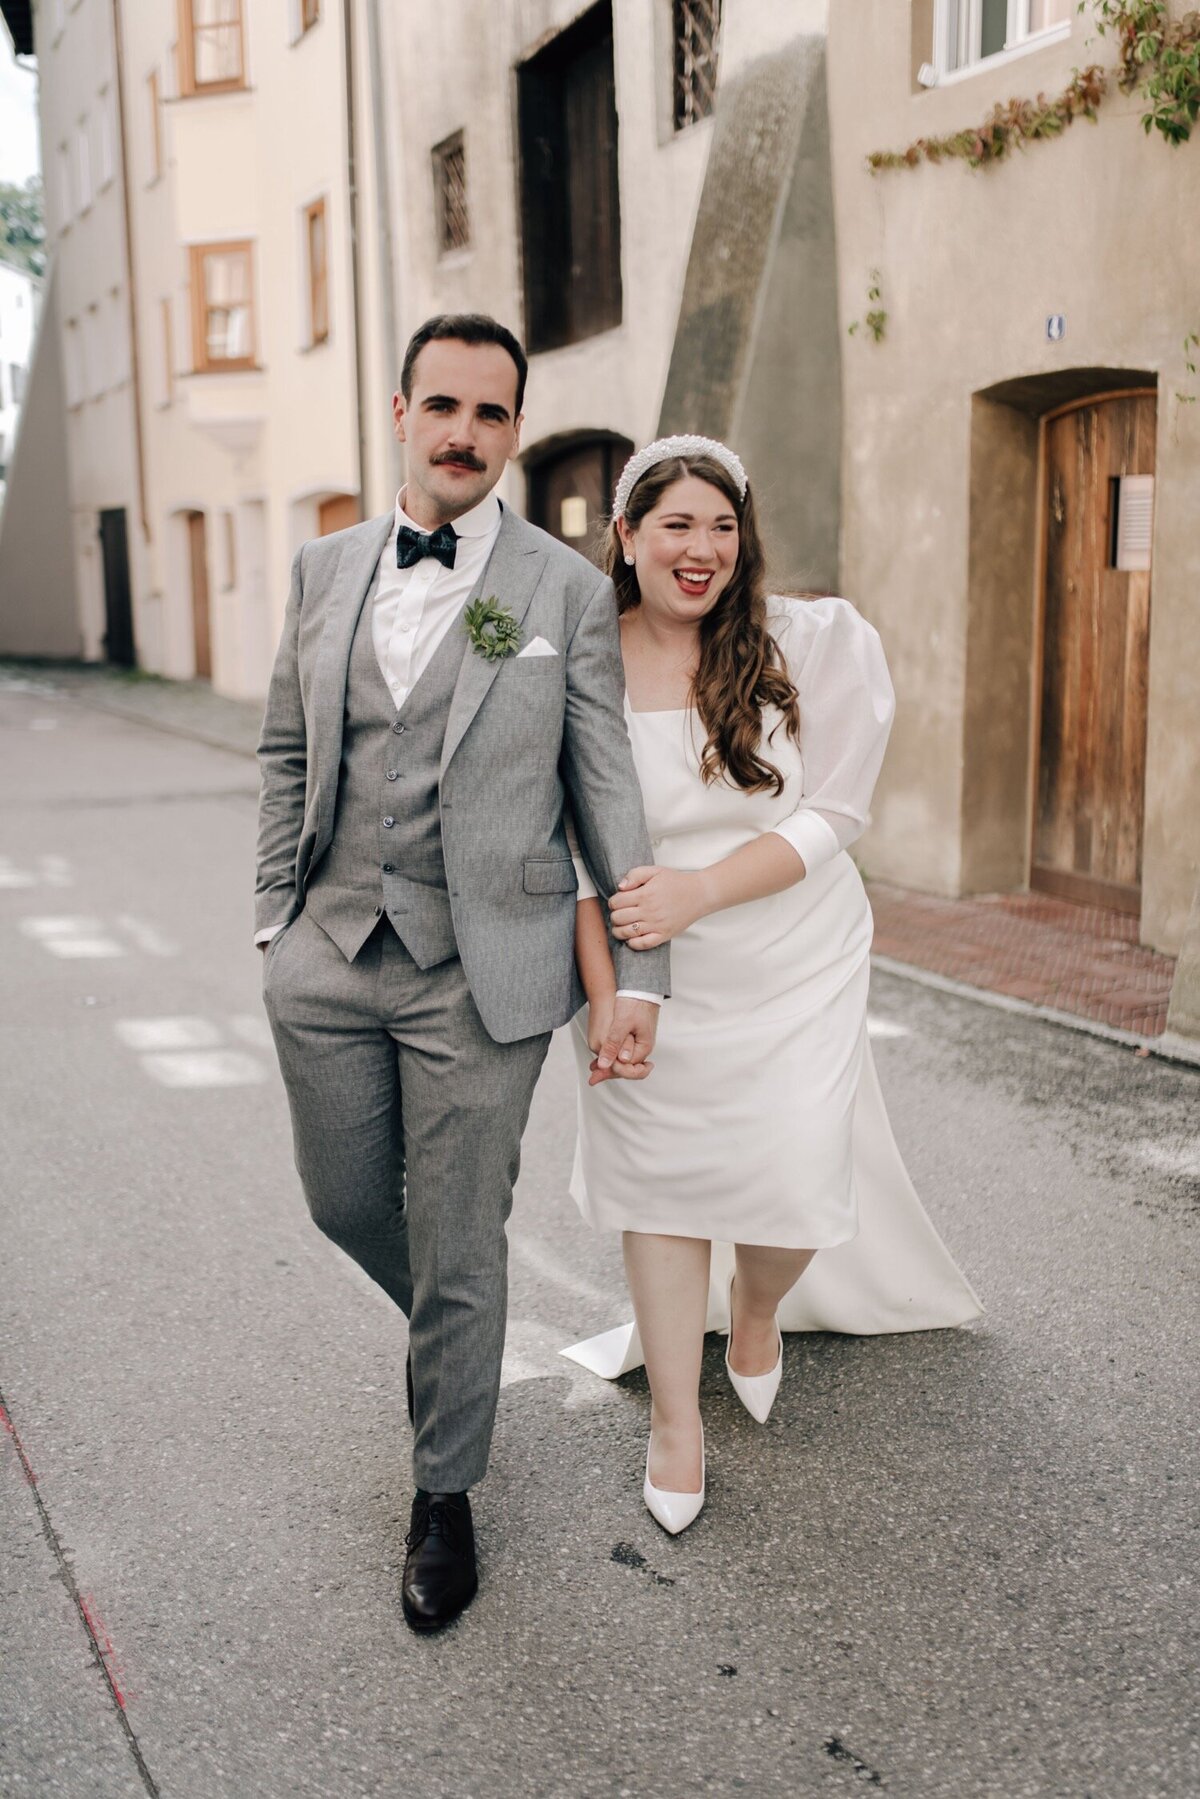 068_Flora_And_Grace_Europe_Editorial_Wedding_Photographer-0-94_An elegant wedding in Italy with a fashion edge and refined floral design.